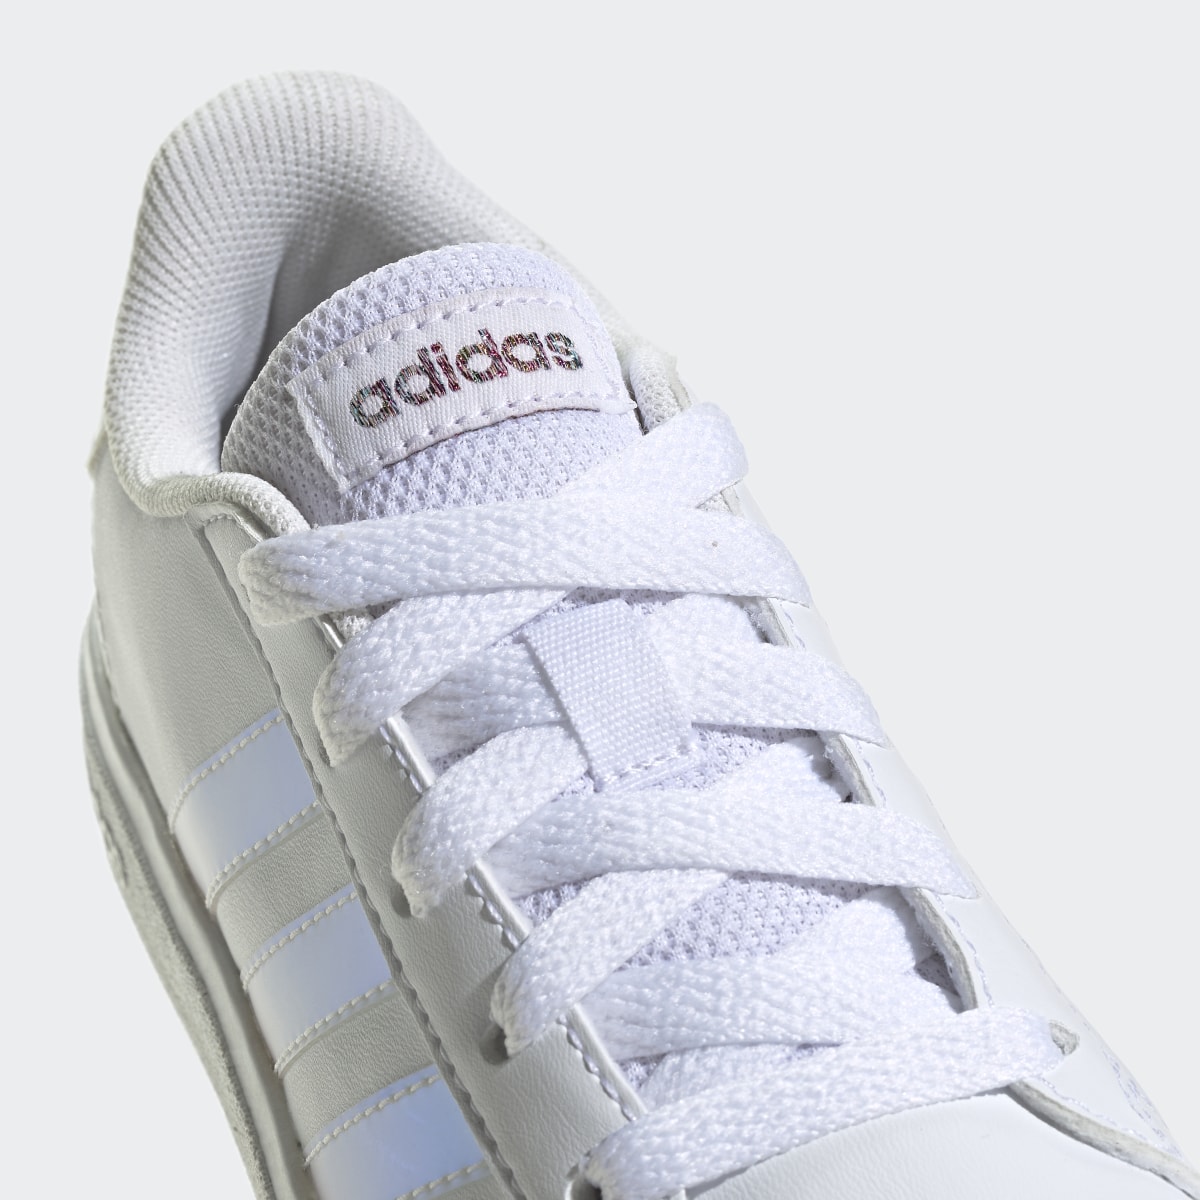 Adidas Grand Court Lifestyle Lace Tennis Shoes. 9